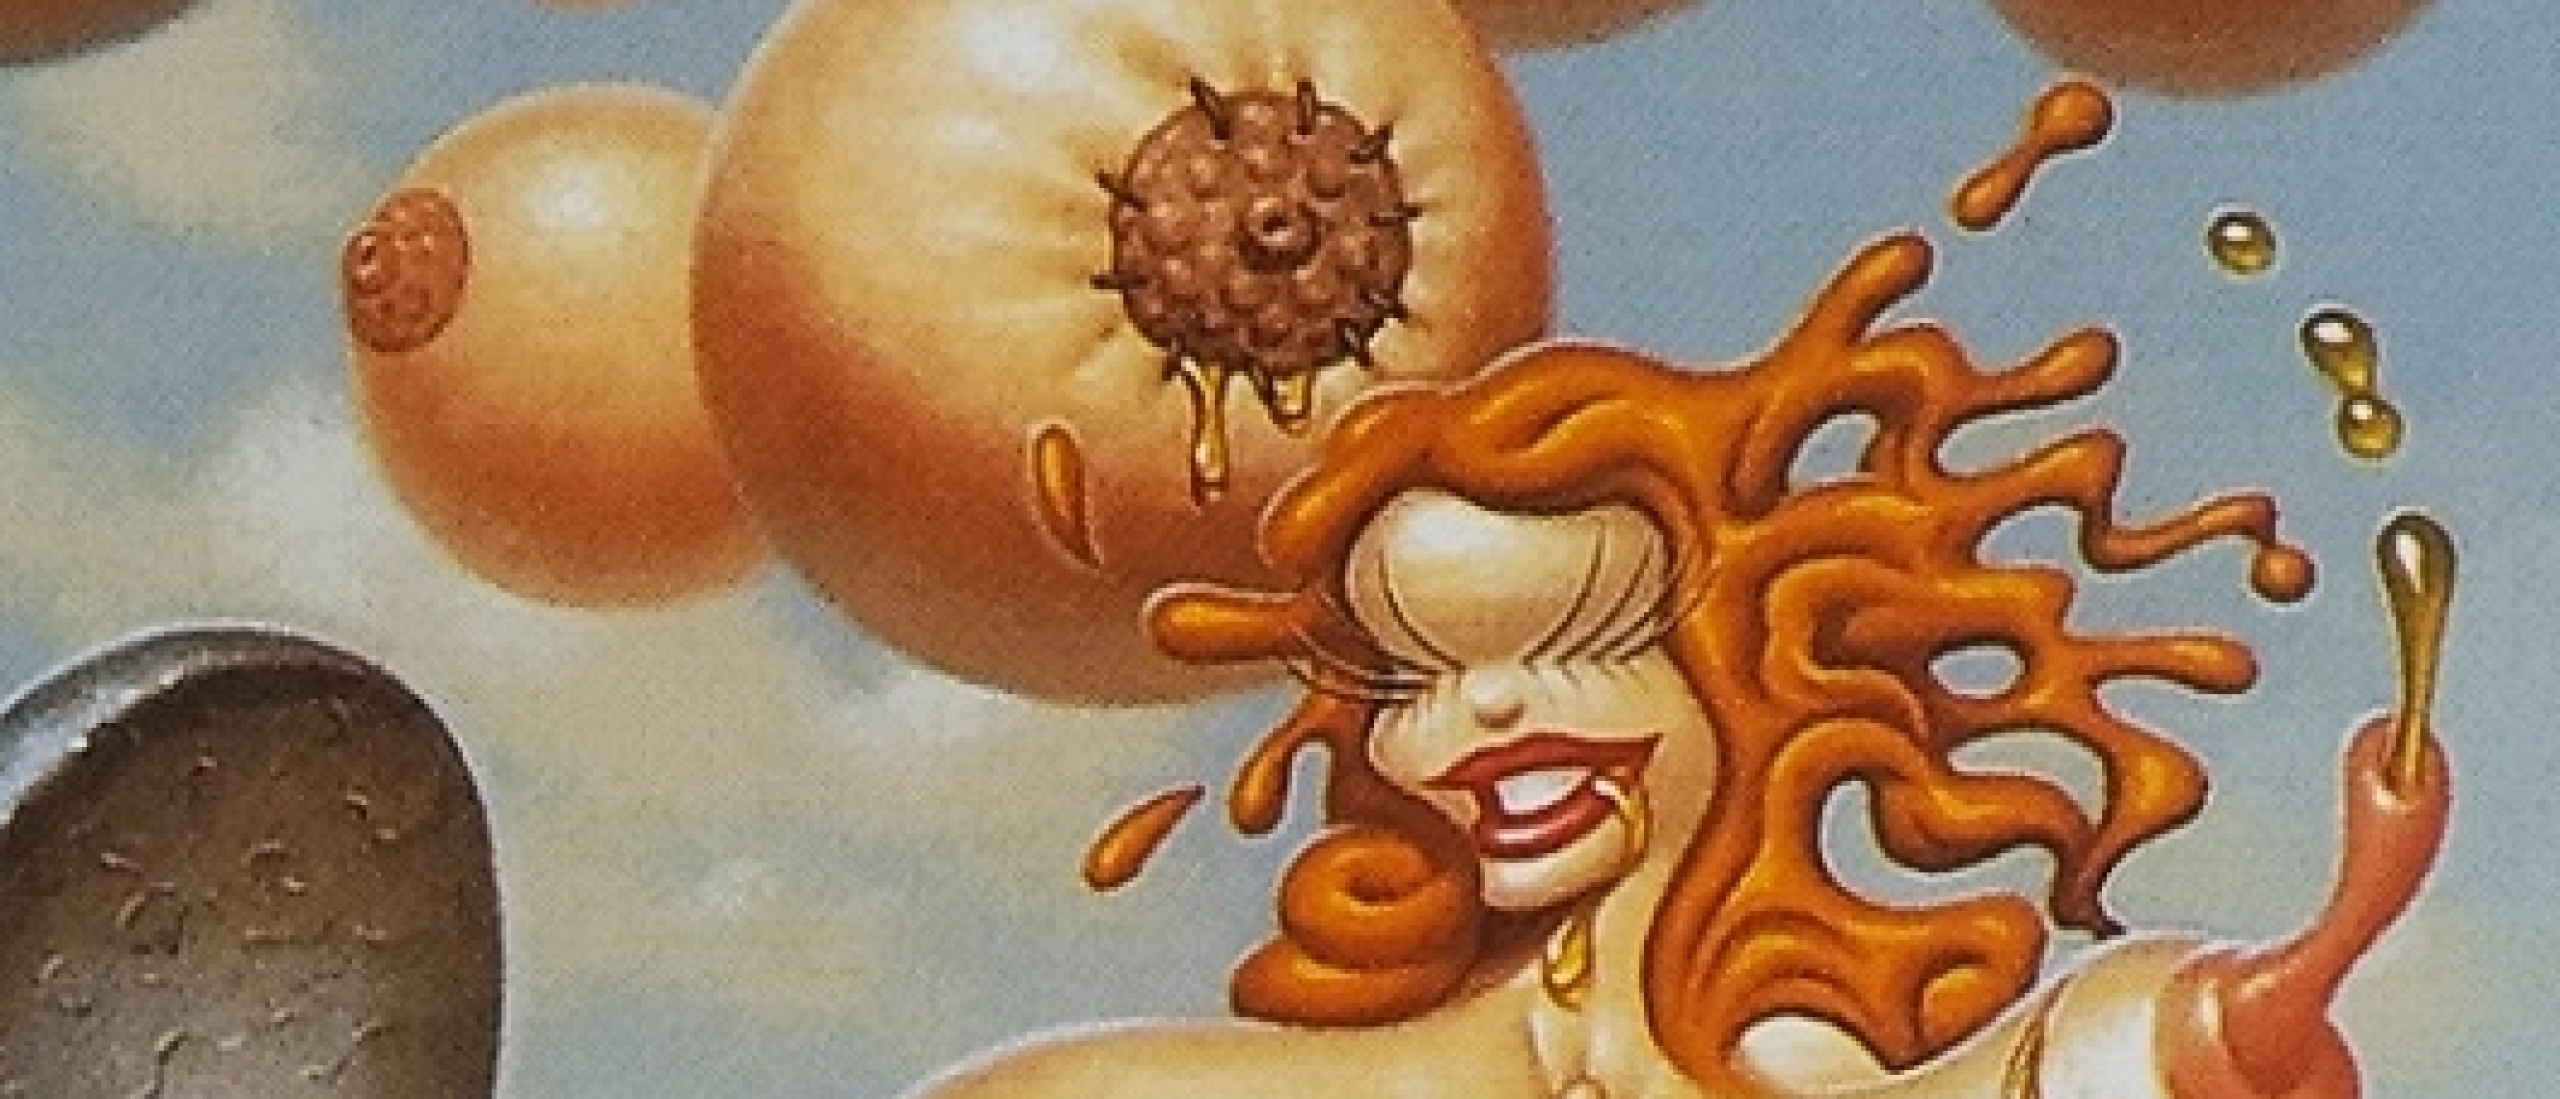 Sensual Elements in the Lowbrow Fantasies of Todd Schorr